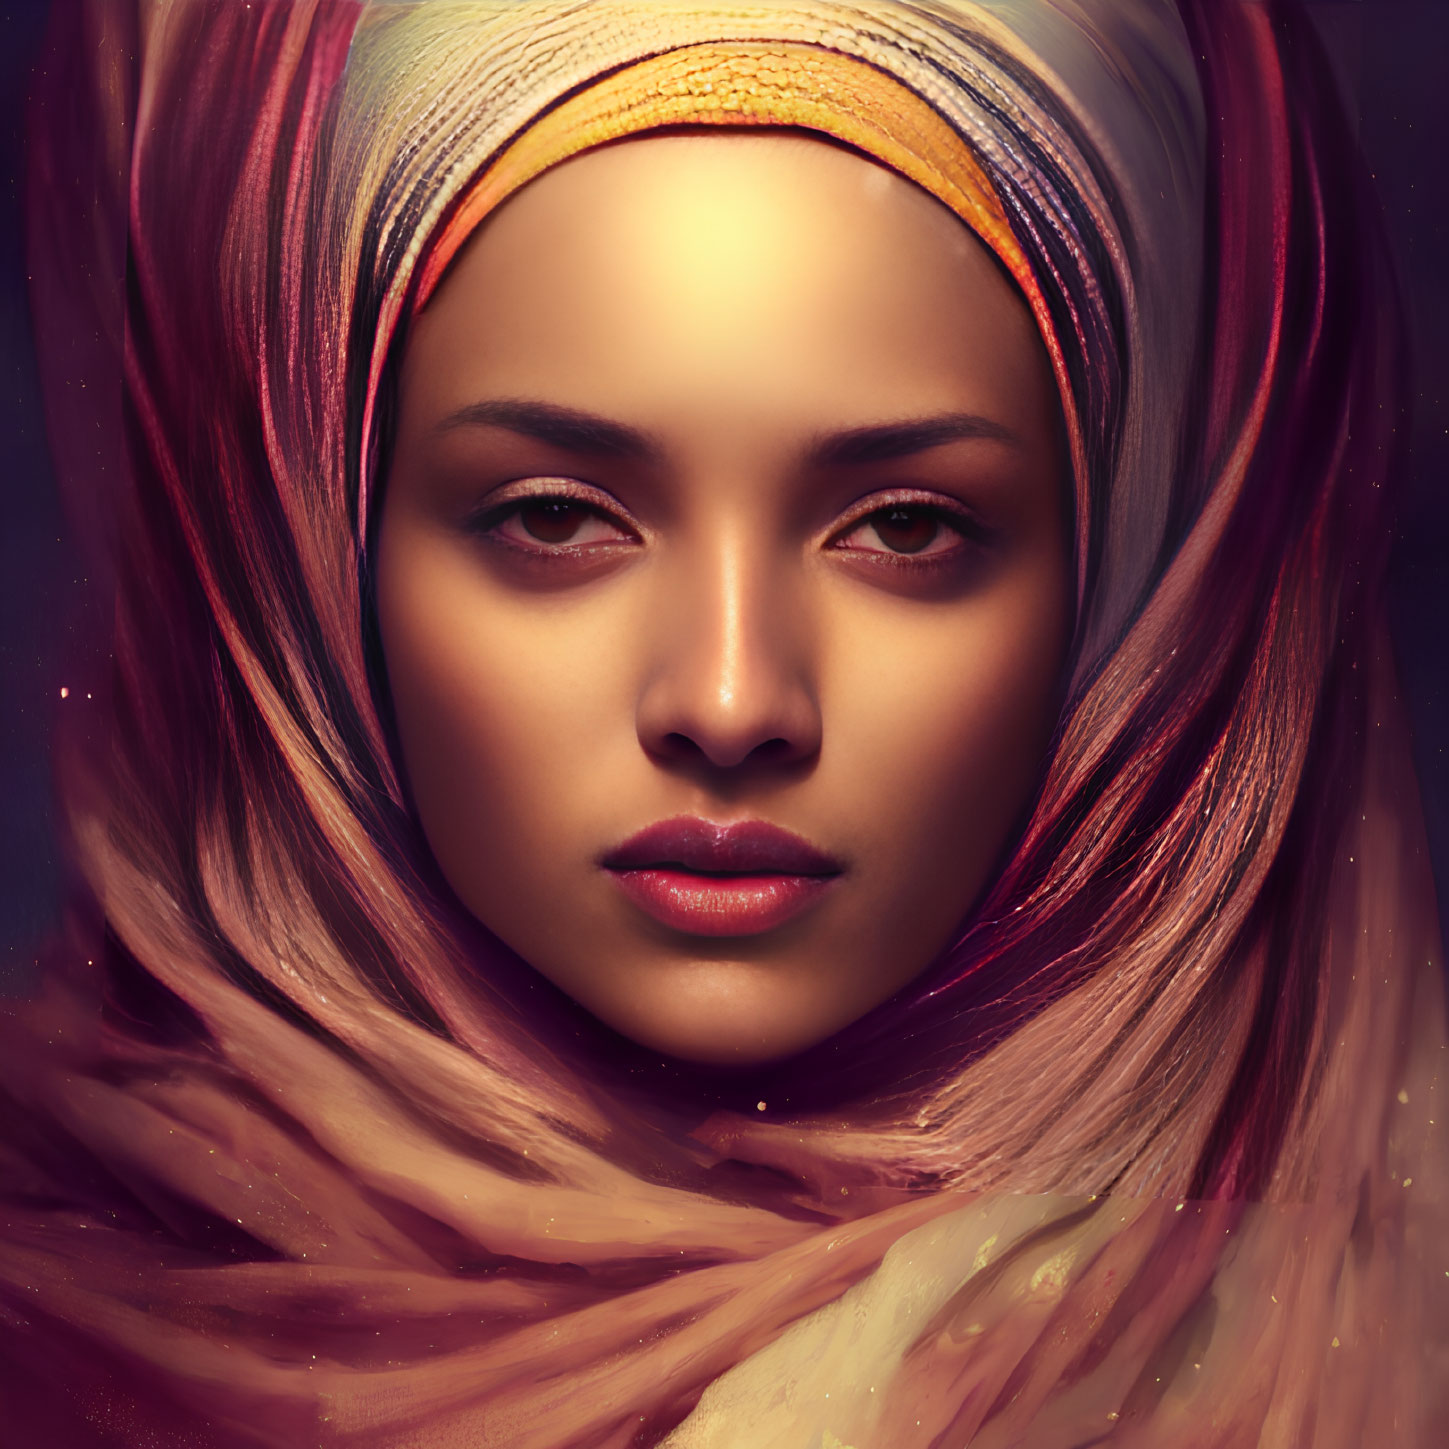 Colorful headscarf woman digital artwork with warm hues and soft lighting